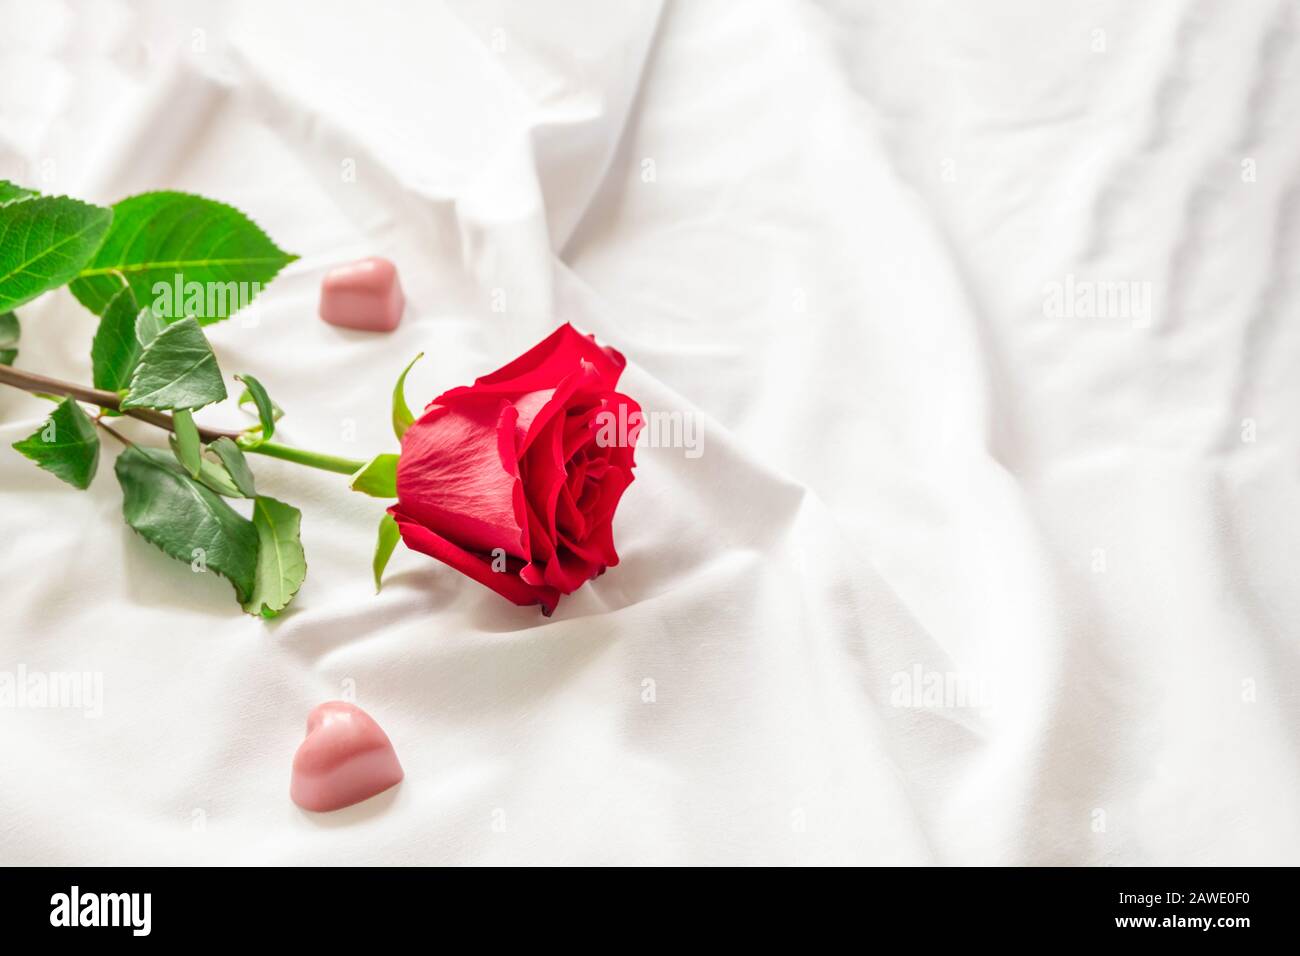 Beautiful romantic morning with red rose and little heart shaped ...